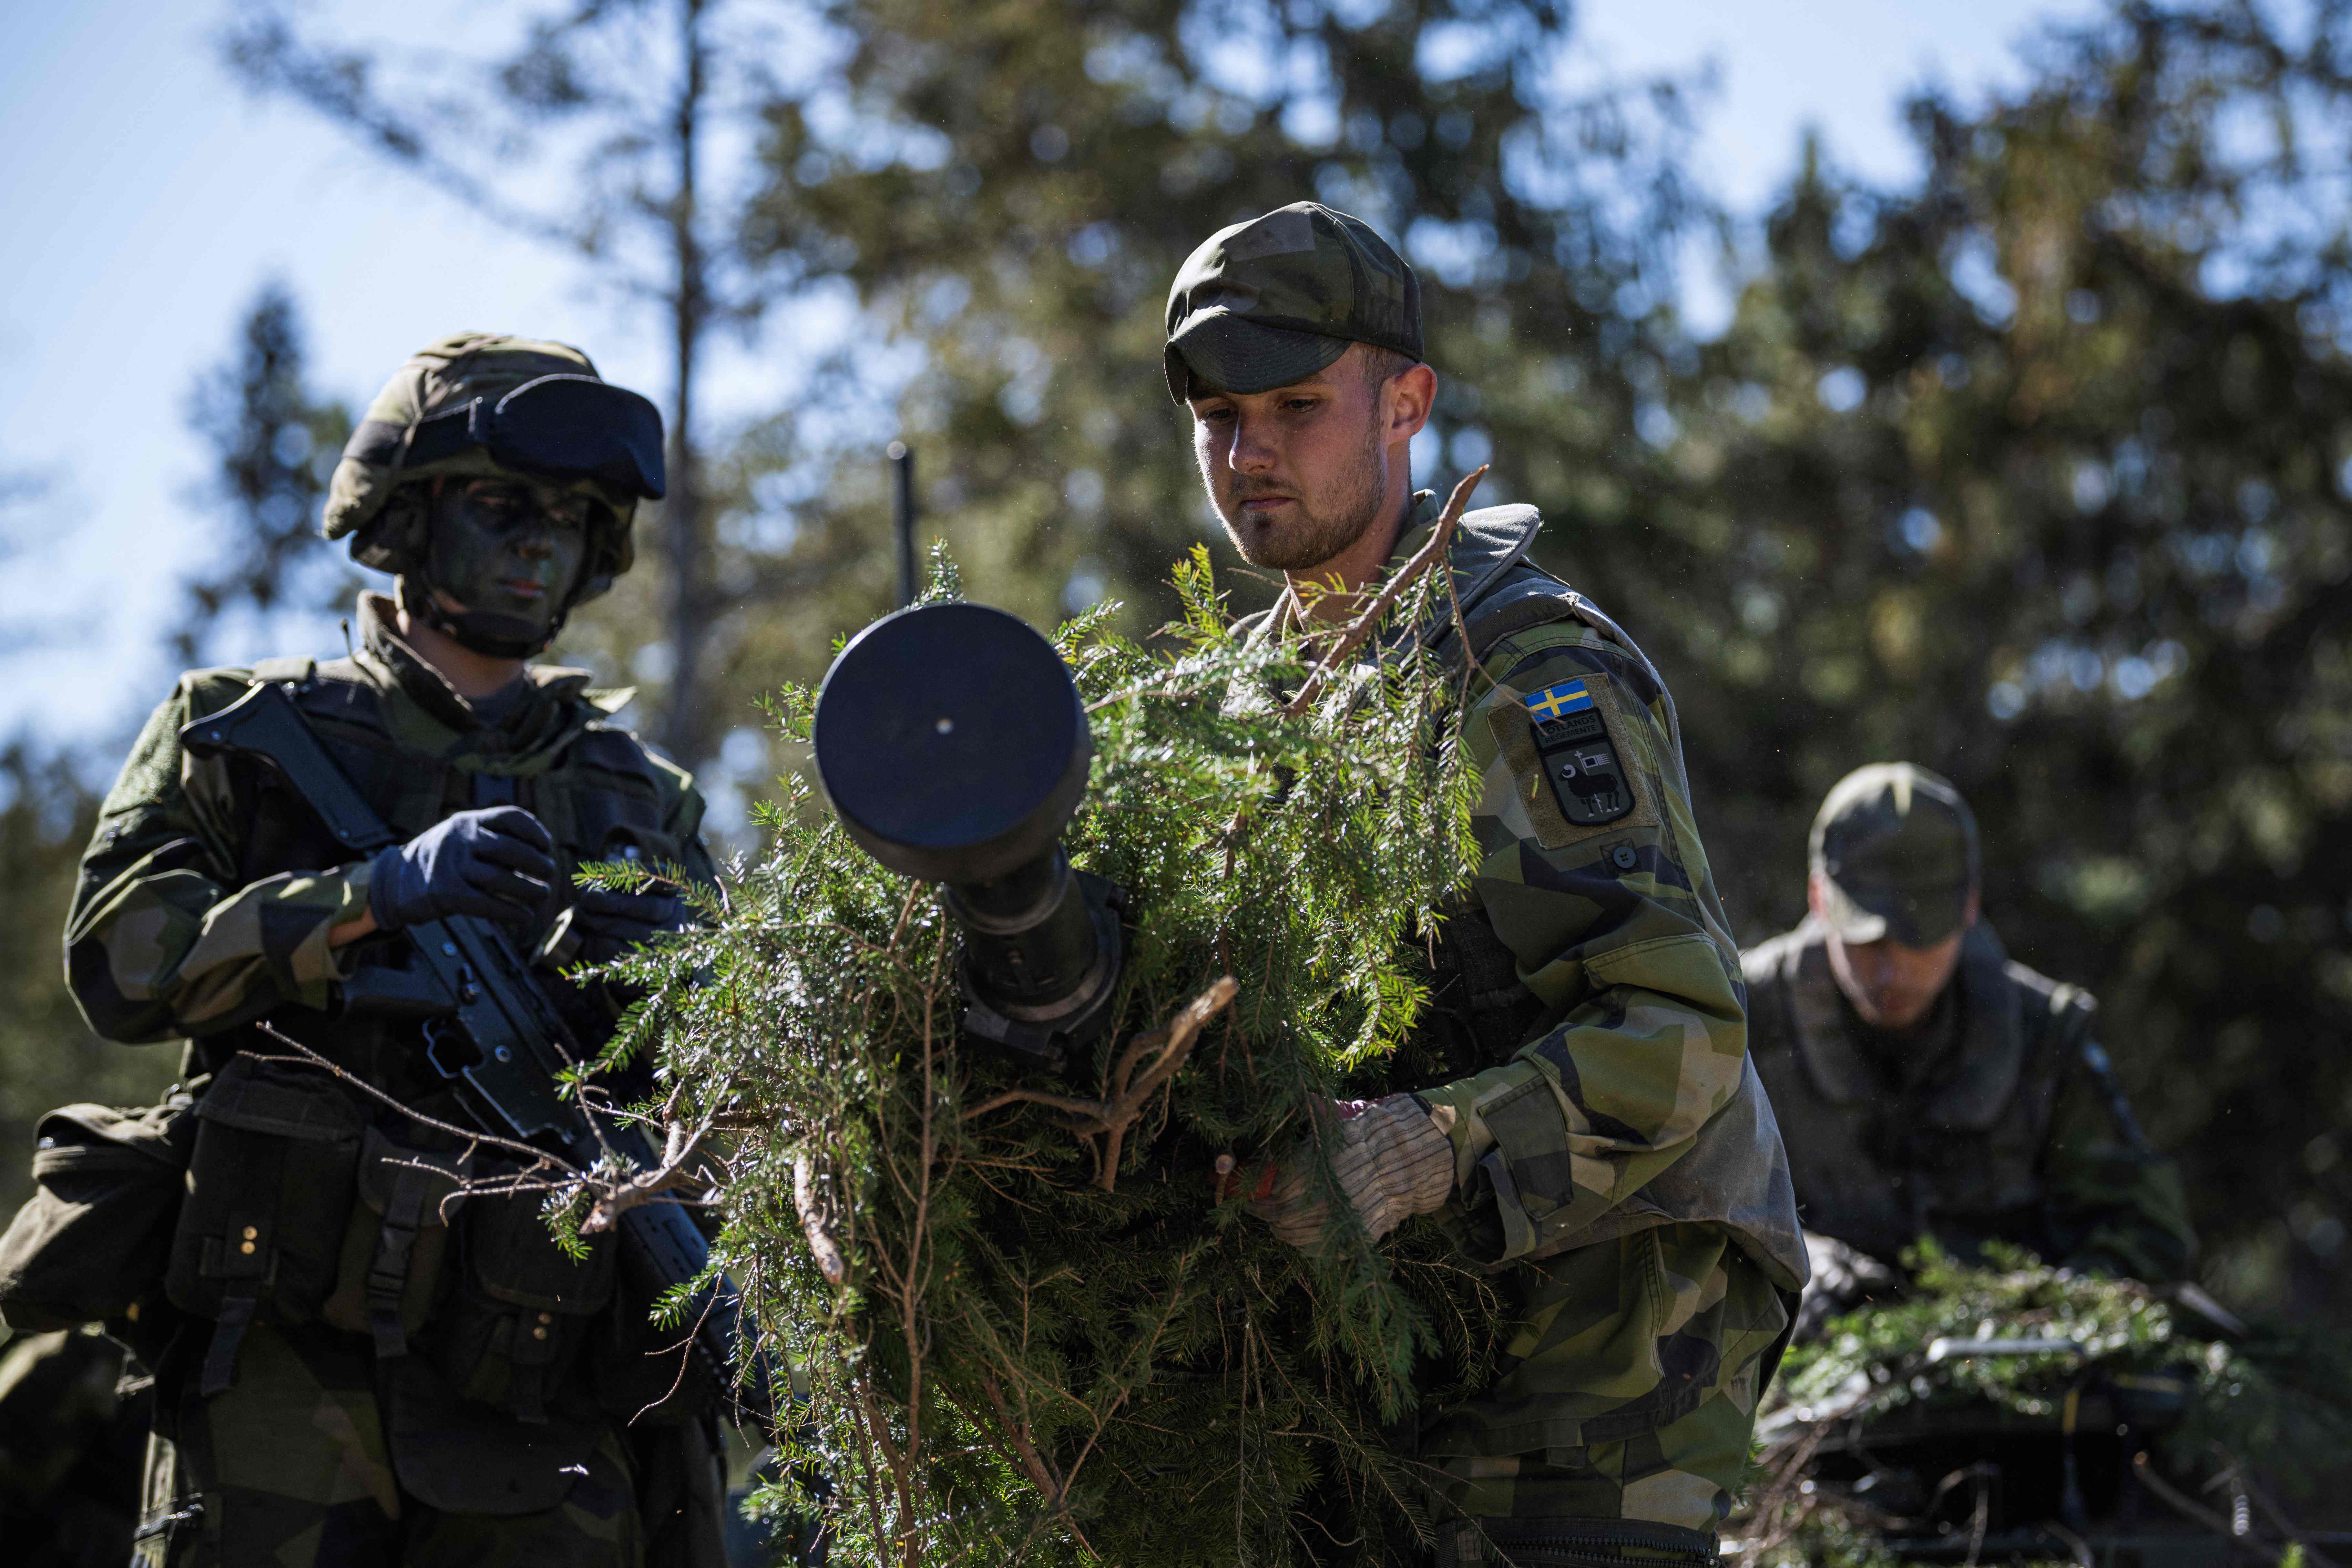 Swedish Home Guard soldiers: Finland and Sweden are expected to announce this week whether to apply to join NATO